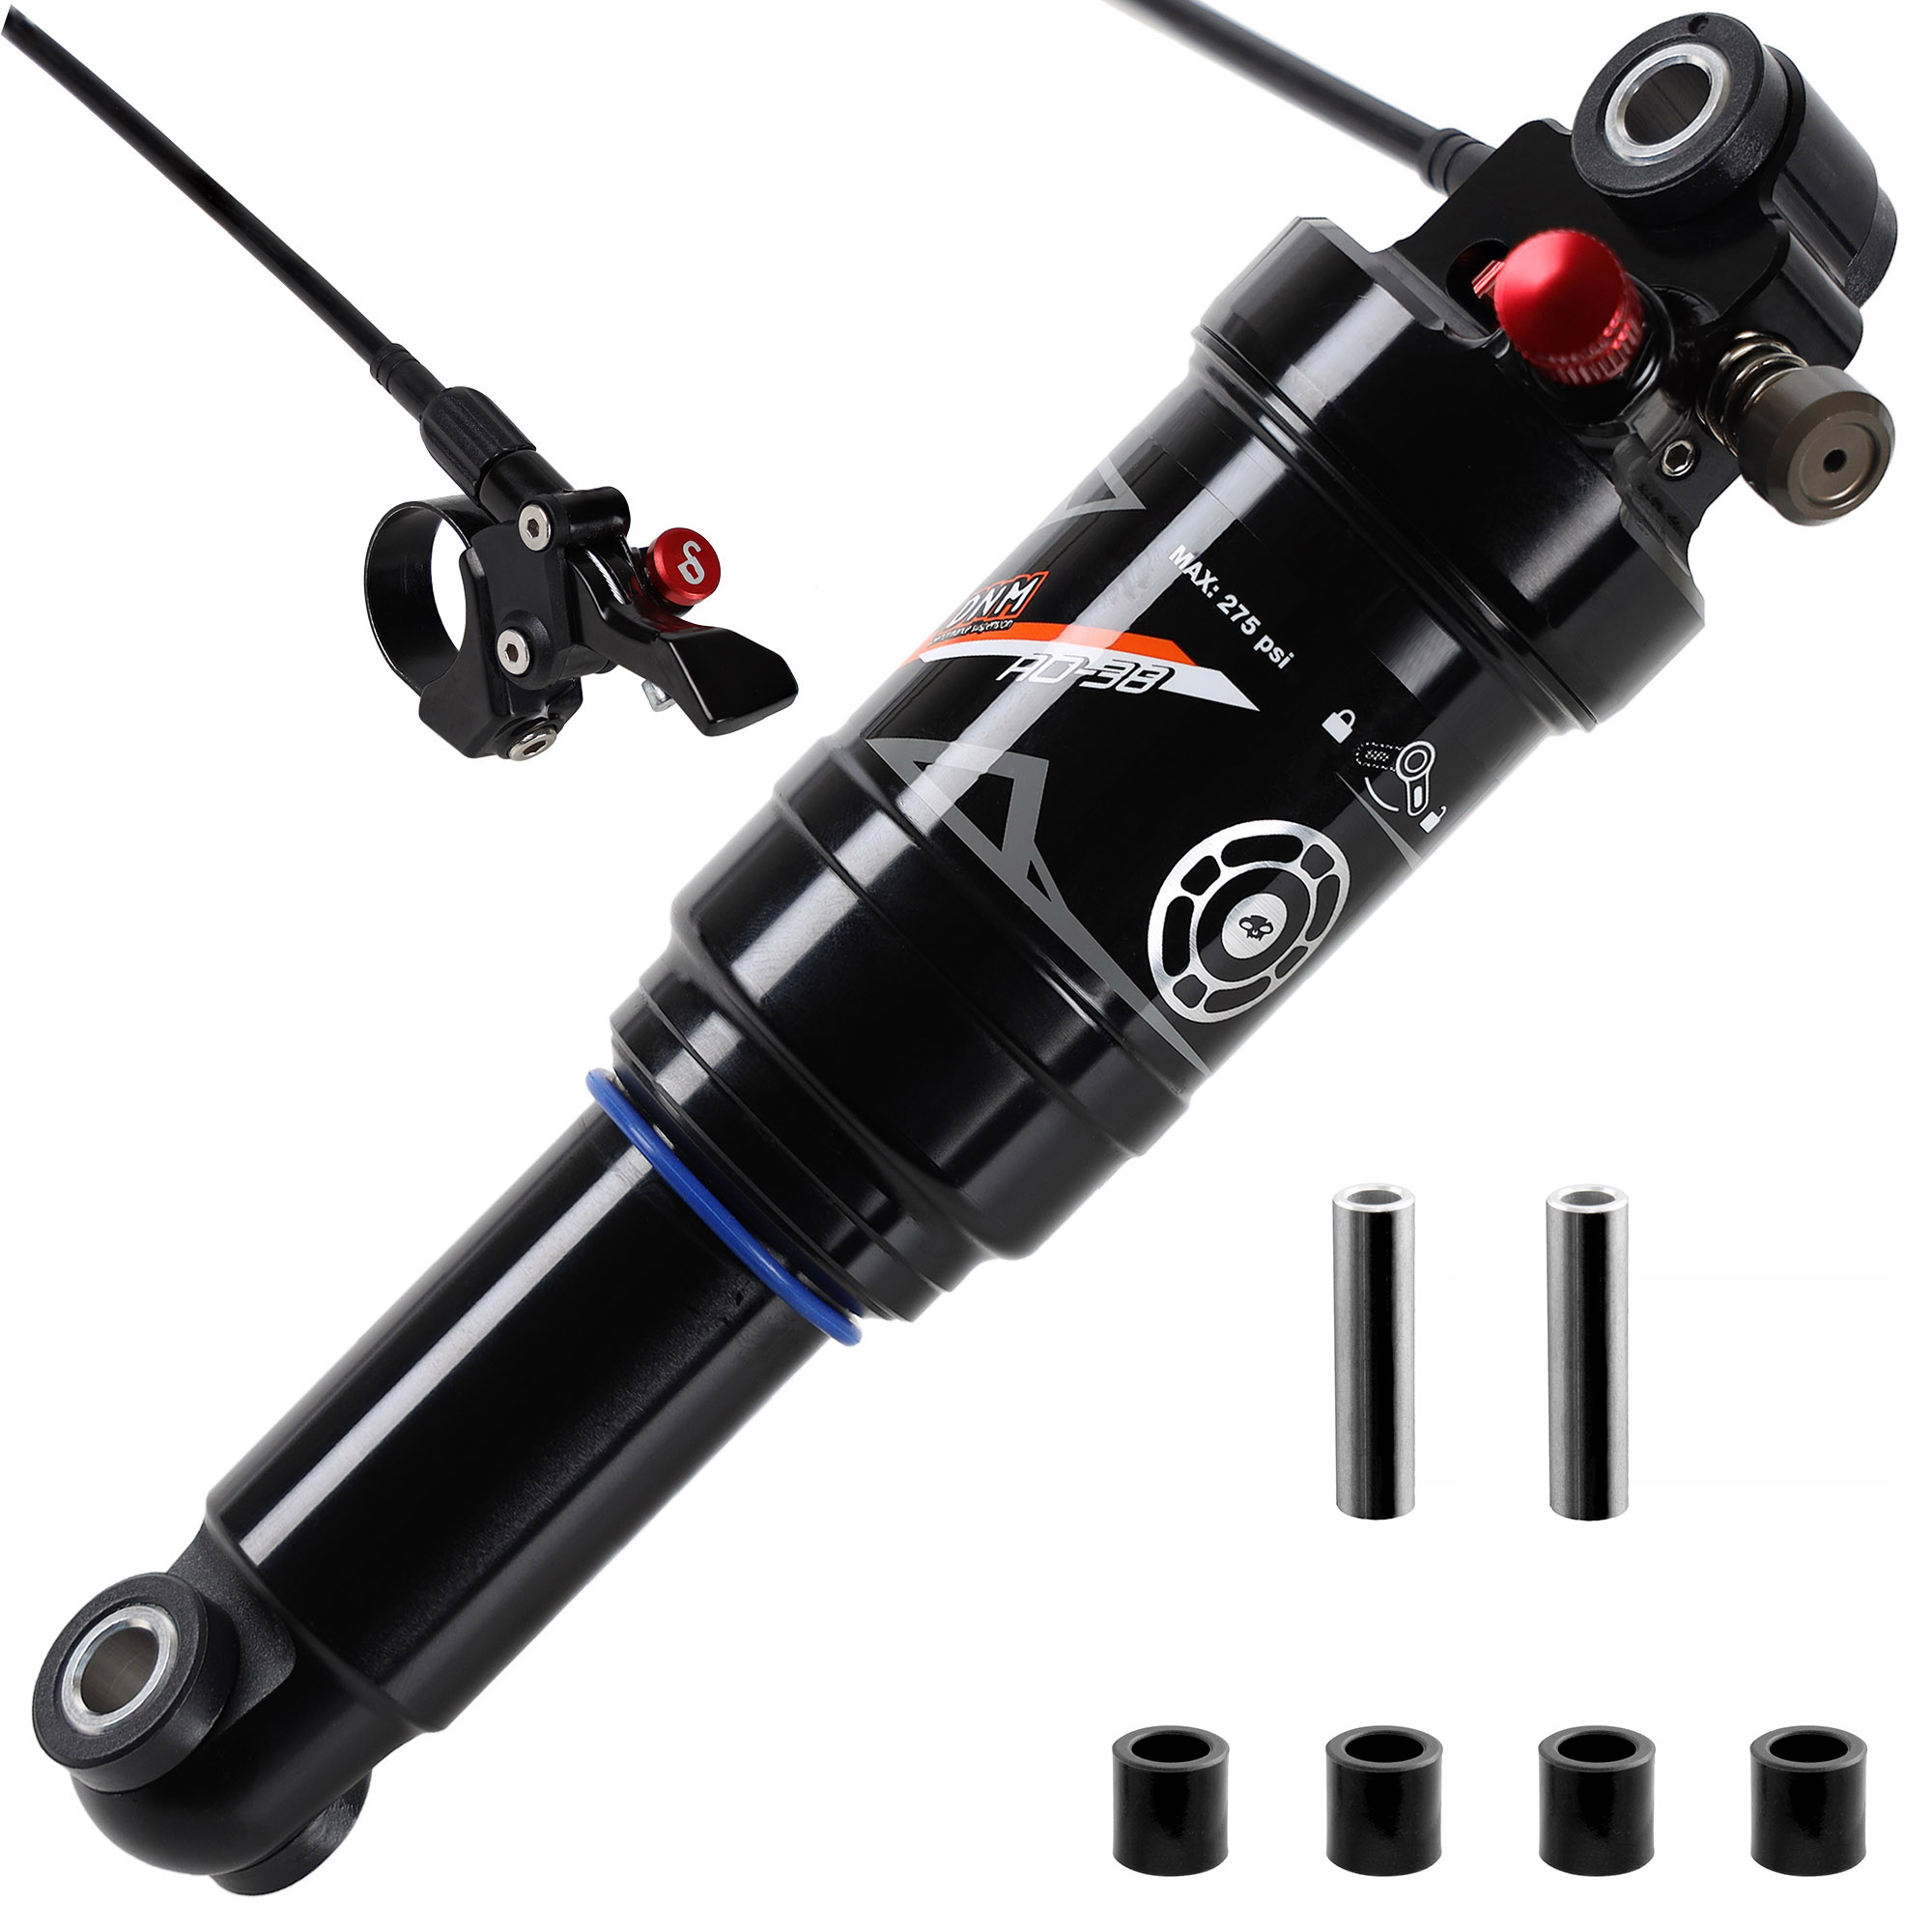 DNM AO-38RL Mountain Bike Air Rear Shock With Remote Lockout 210mm Travel 53mm